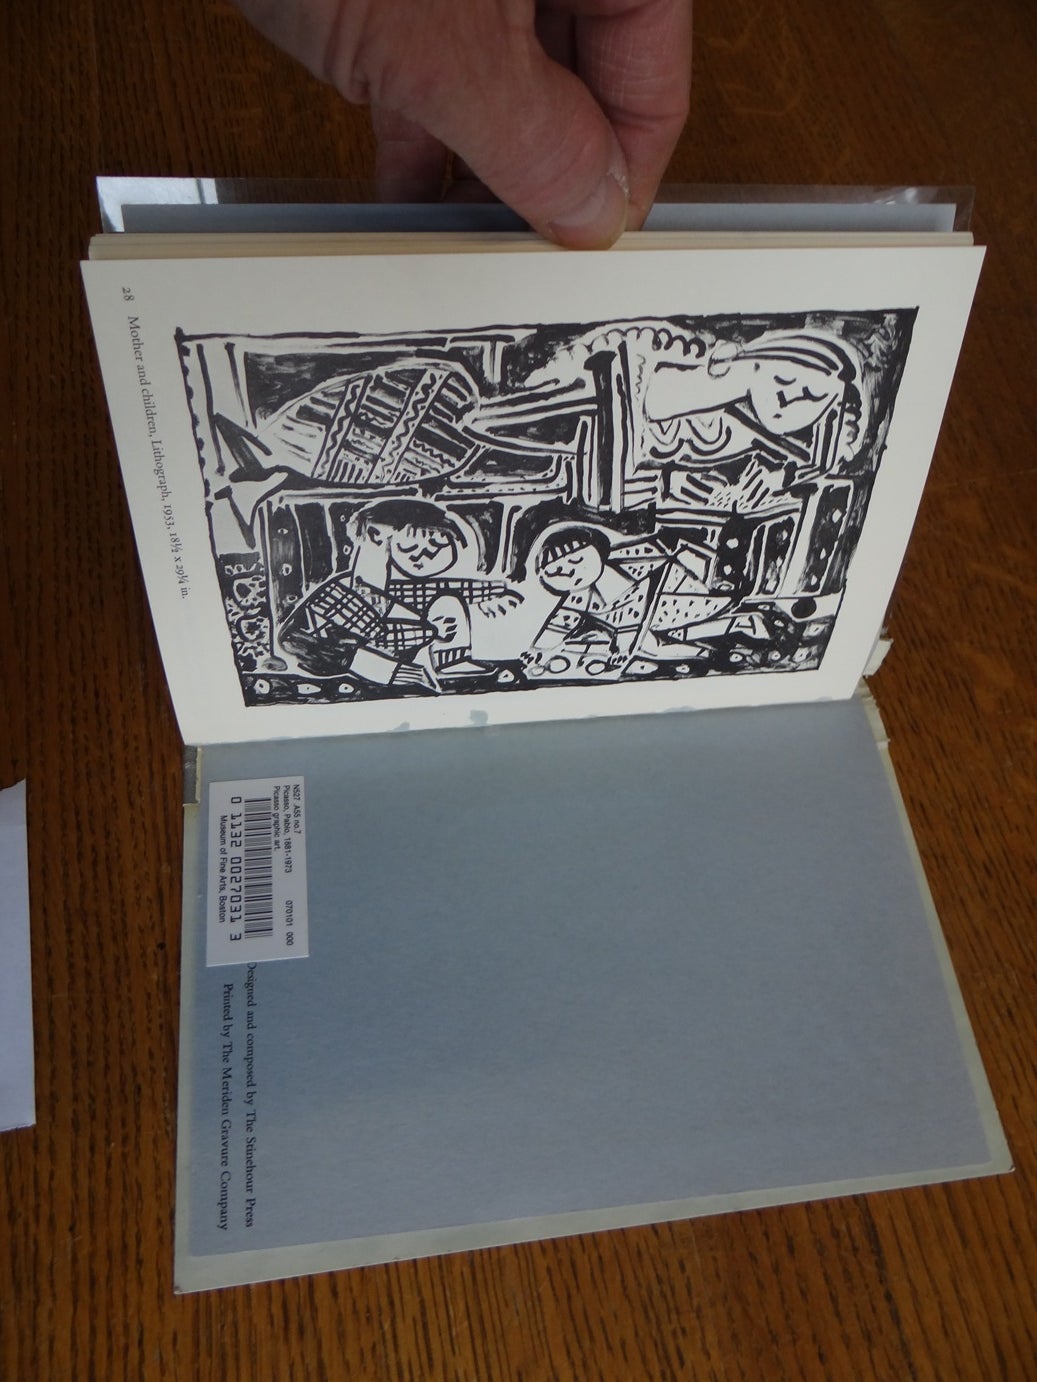 Picasso: Graphic Art by Jakob Rosenberg on Mullen Books